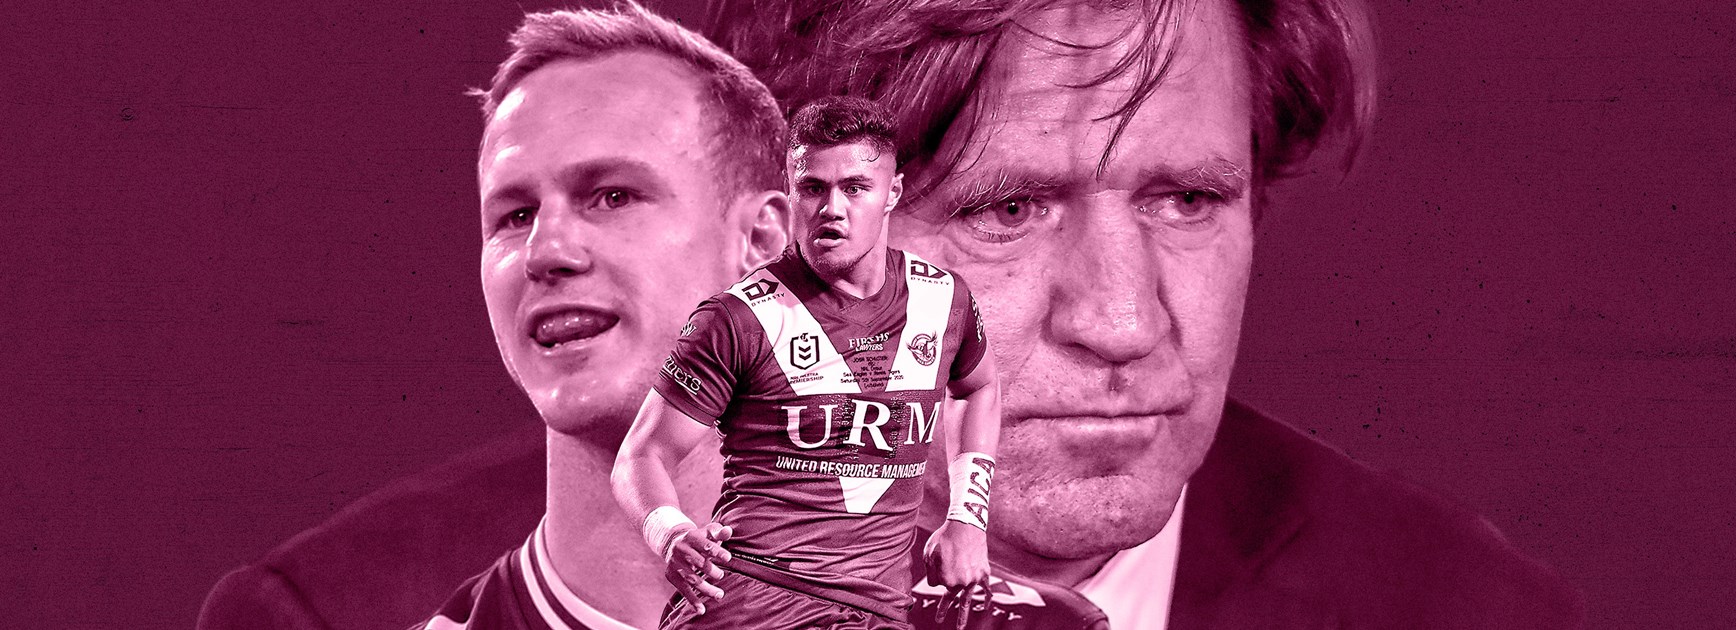 Sea Eagles 2021 season preview: Was last year's failure just bad luck?